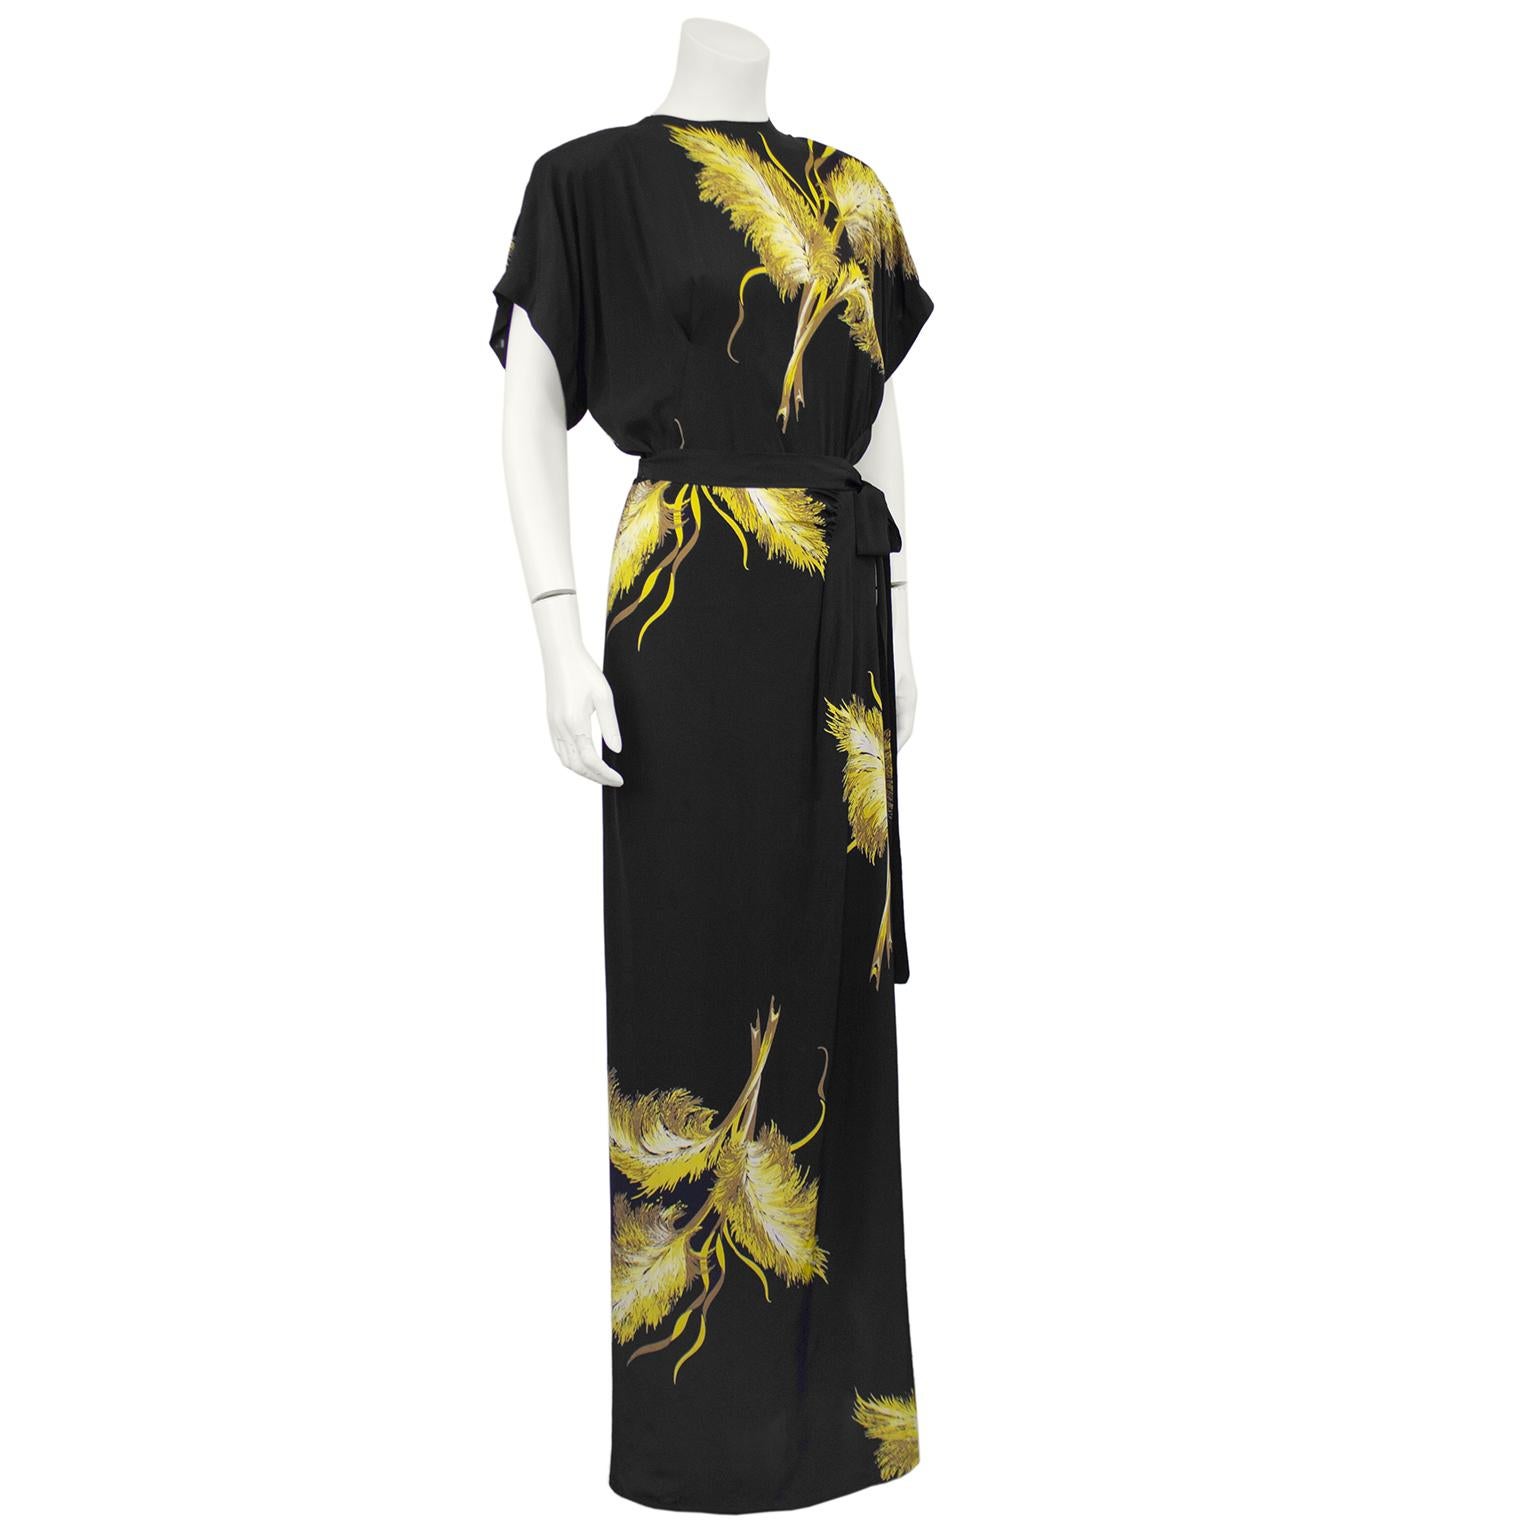 Very beautiful black silk maxi dress with all over large yellow and gold wheat sheaf print dates from the 1940s and was clearly inspired by both Schiaparelli in its long lean silhouette and Gilbert Adrians popular day/dinner dresses featuring